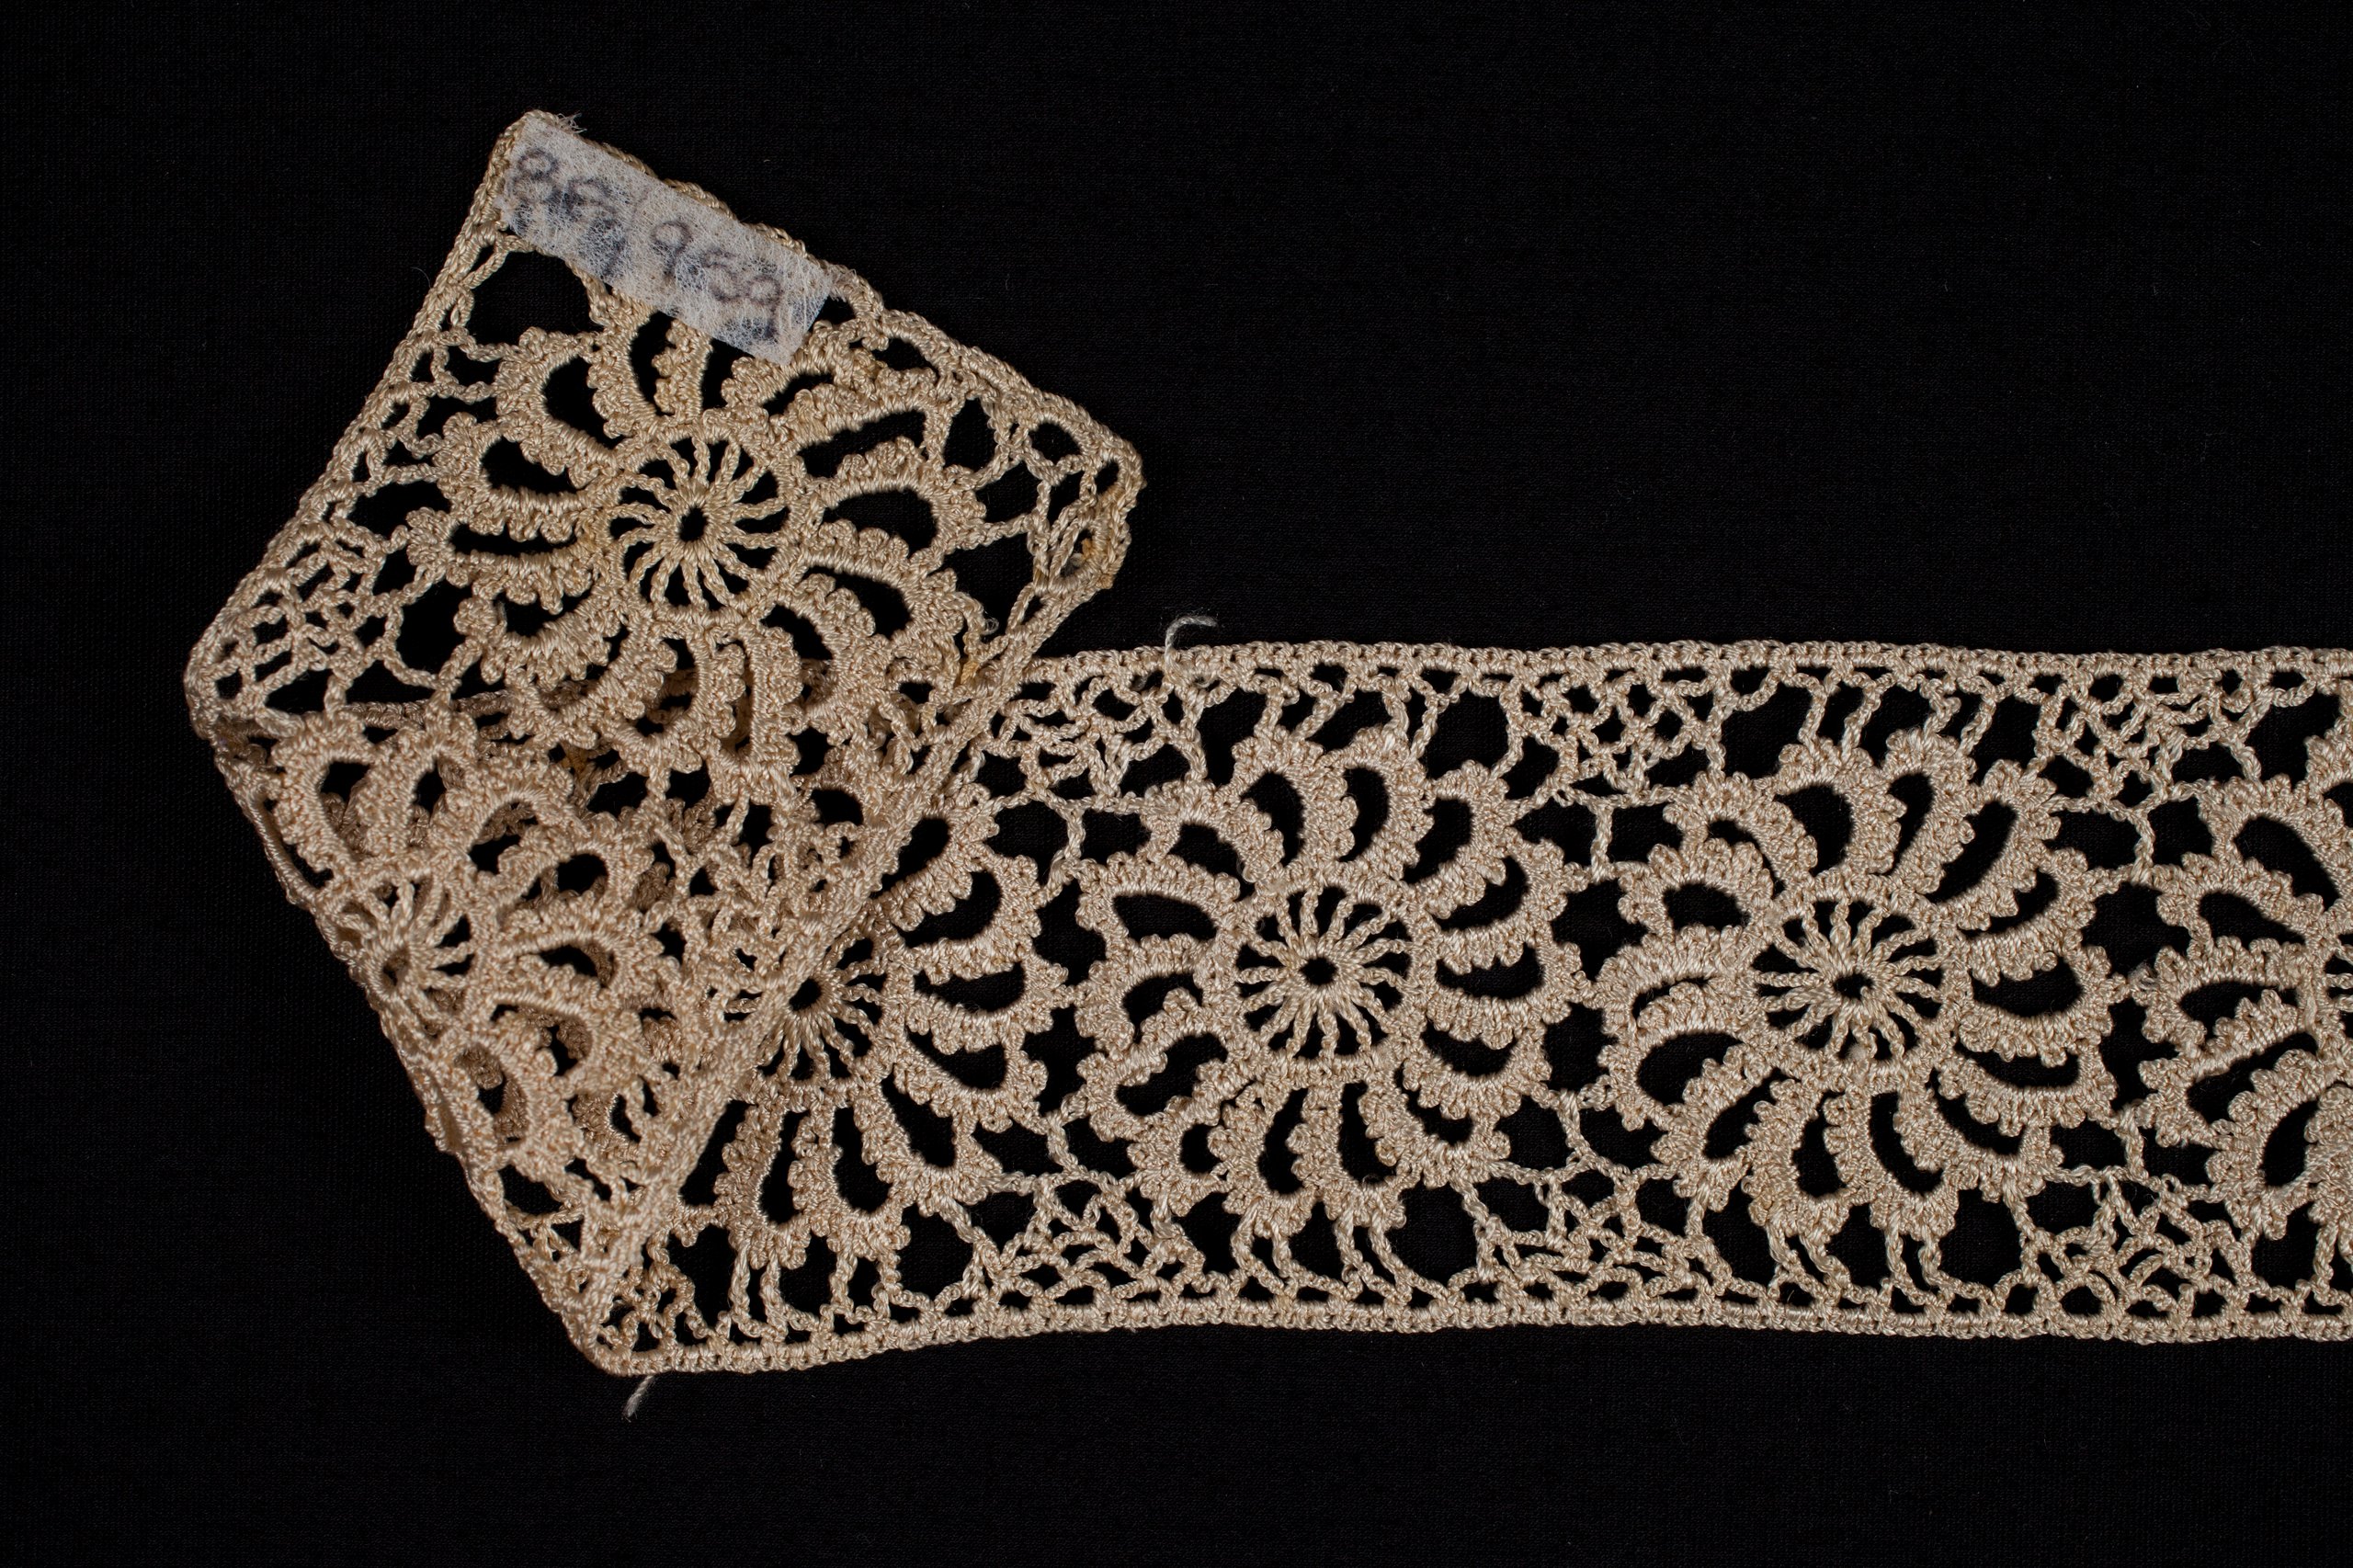 Lace insert made by Margaret Ann Field